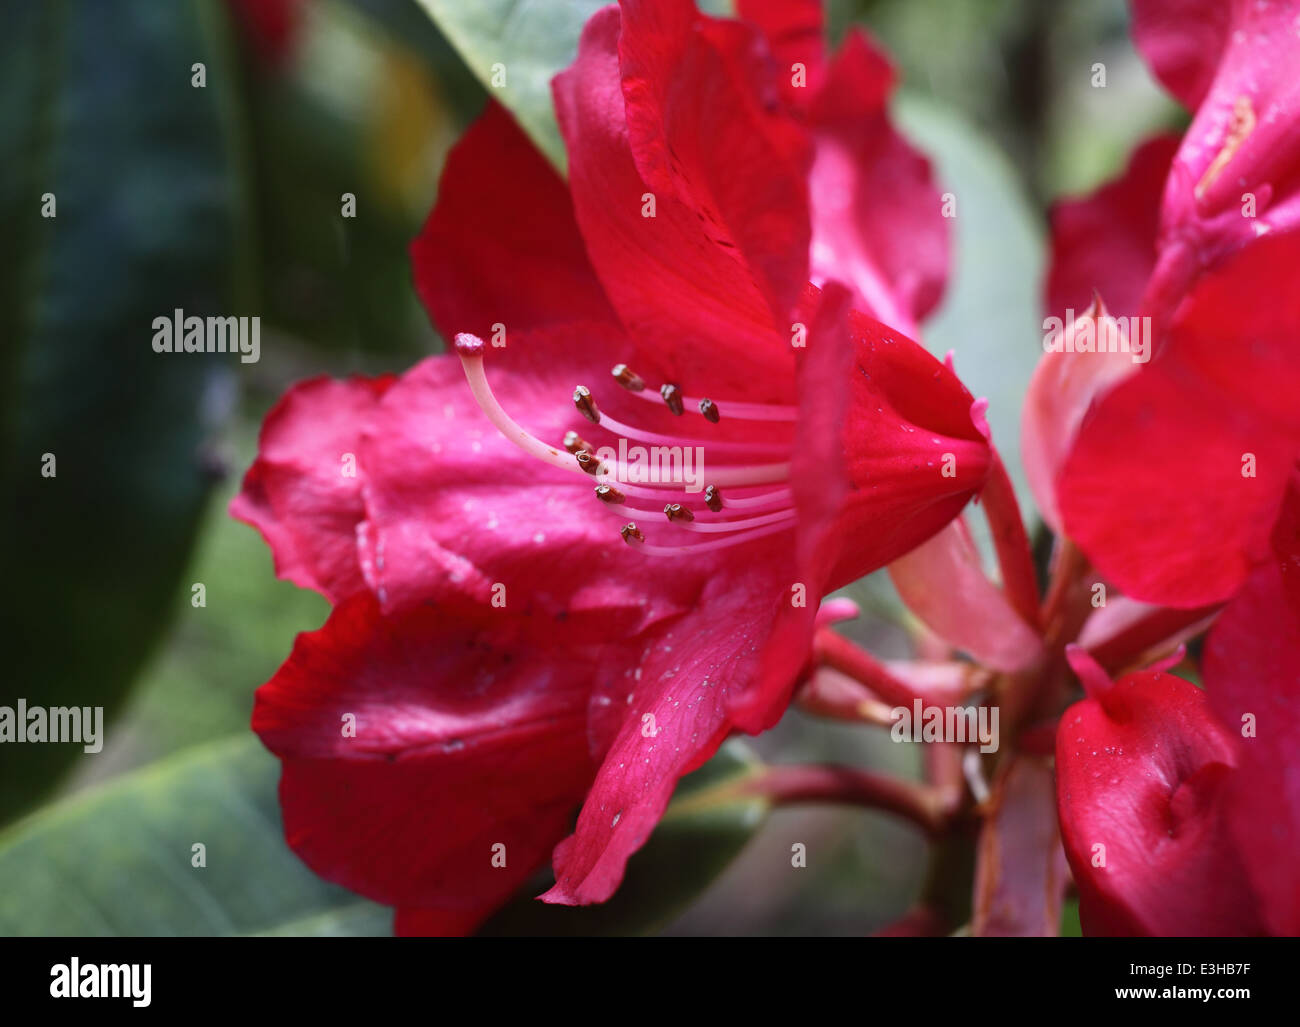 Rhododendron showing close up of stigma and stamens Stock Photo